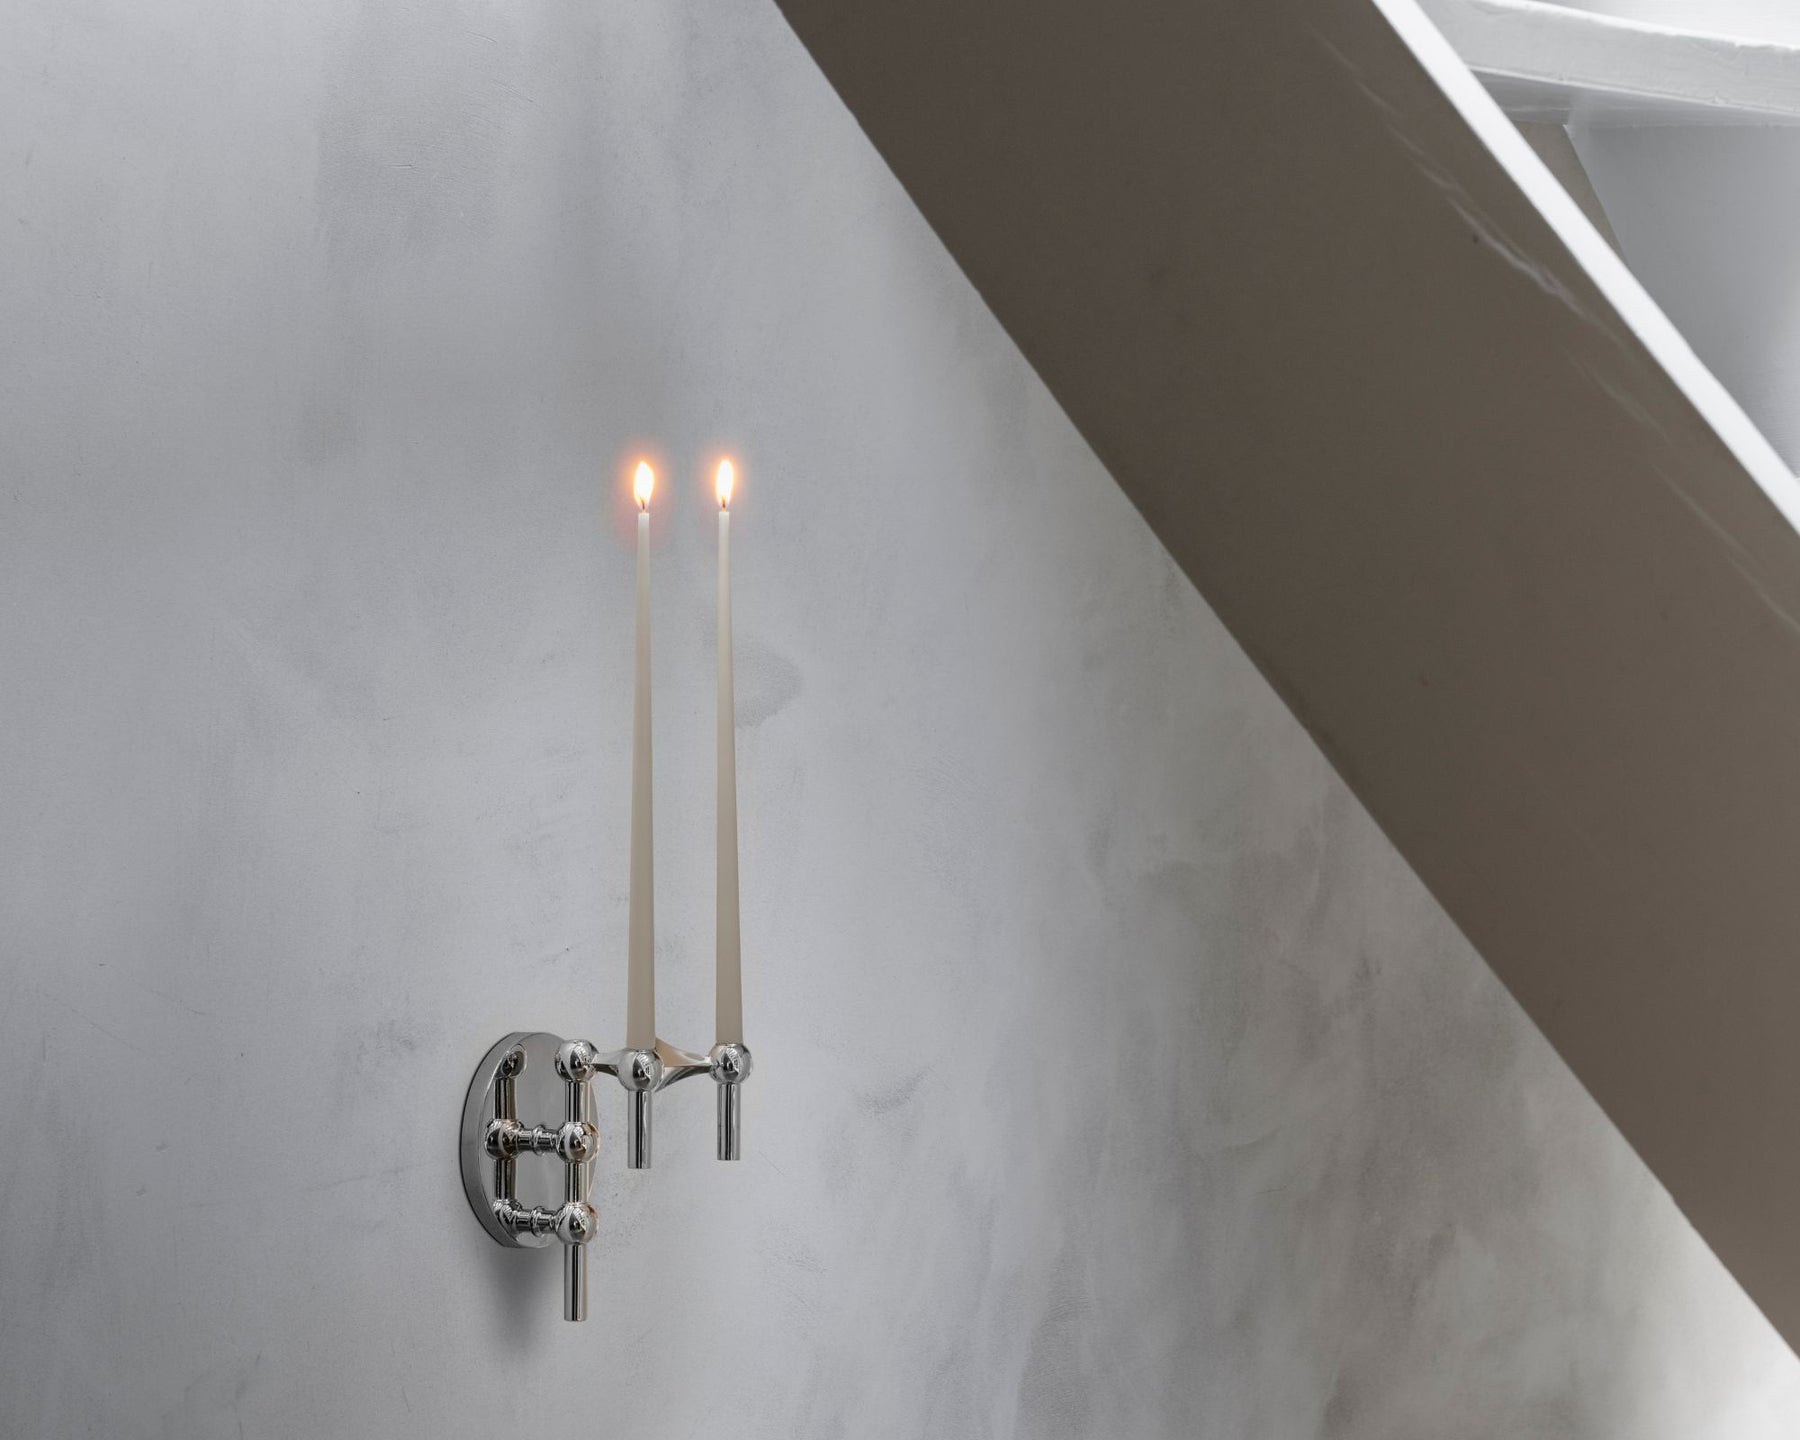 Stoff Nagel Wall Hanger - Chrome Modular Candle Sconce